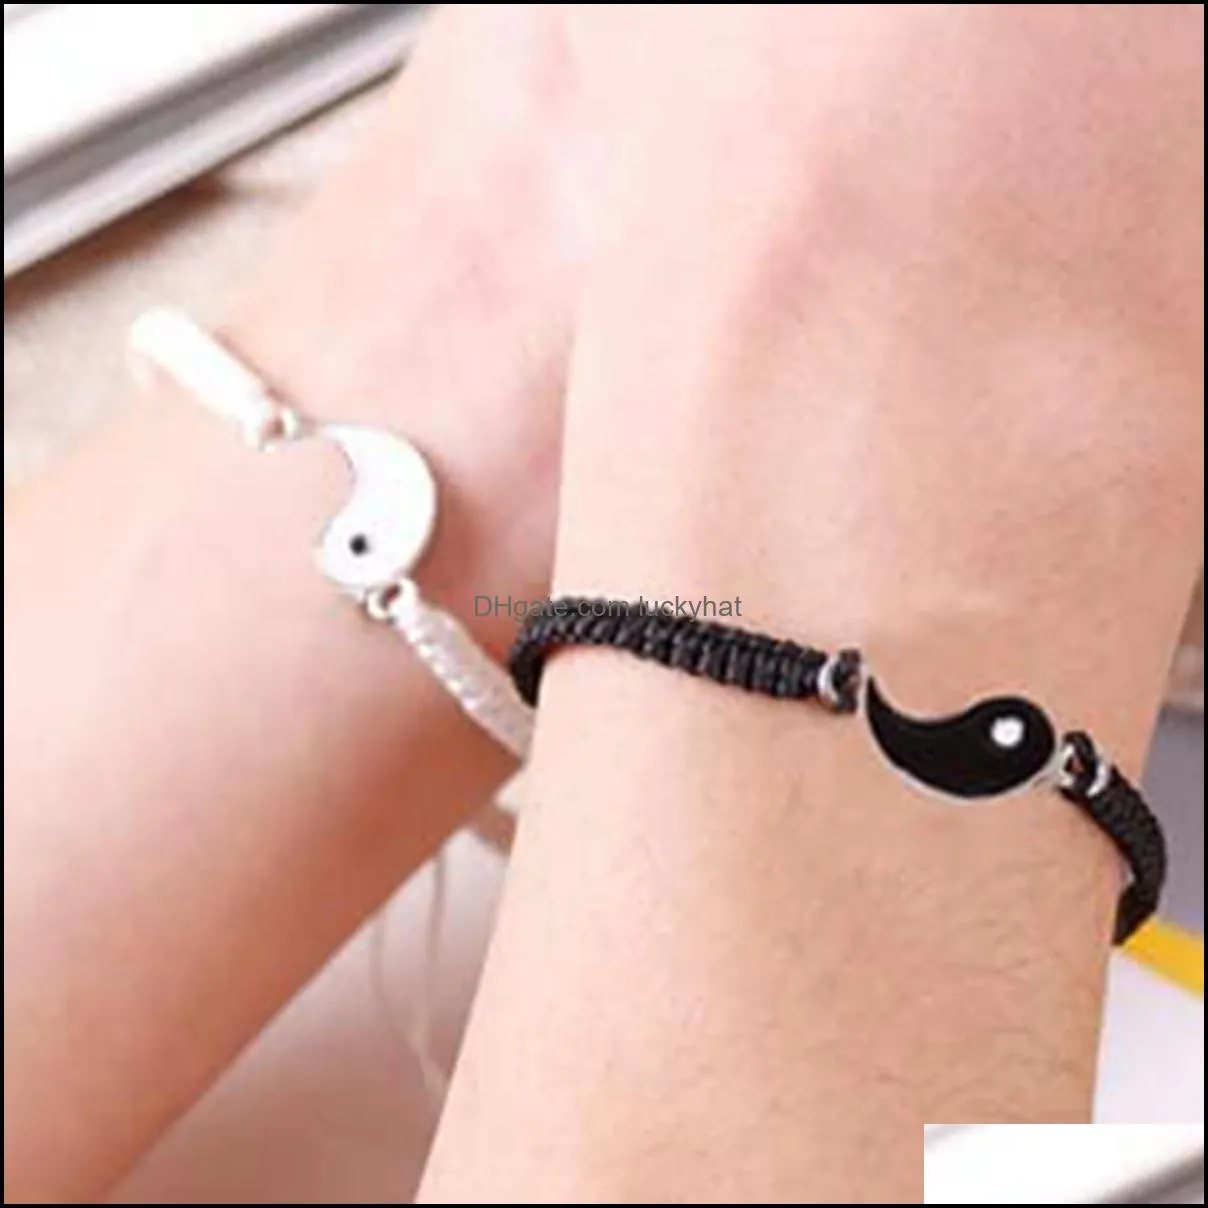 12sets yinyang taiji bracelet adjustable link chain black white matching traditional chinese weaving handicrafts suitable for couples friends yin yang